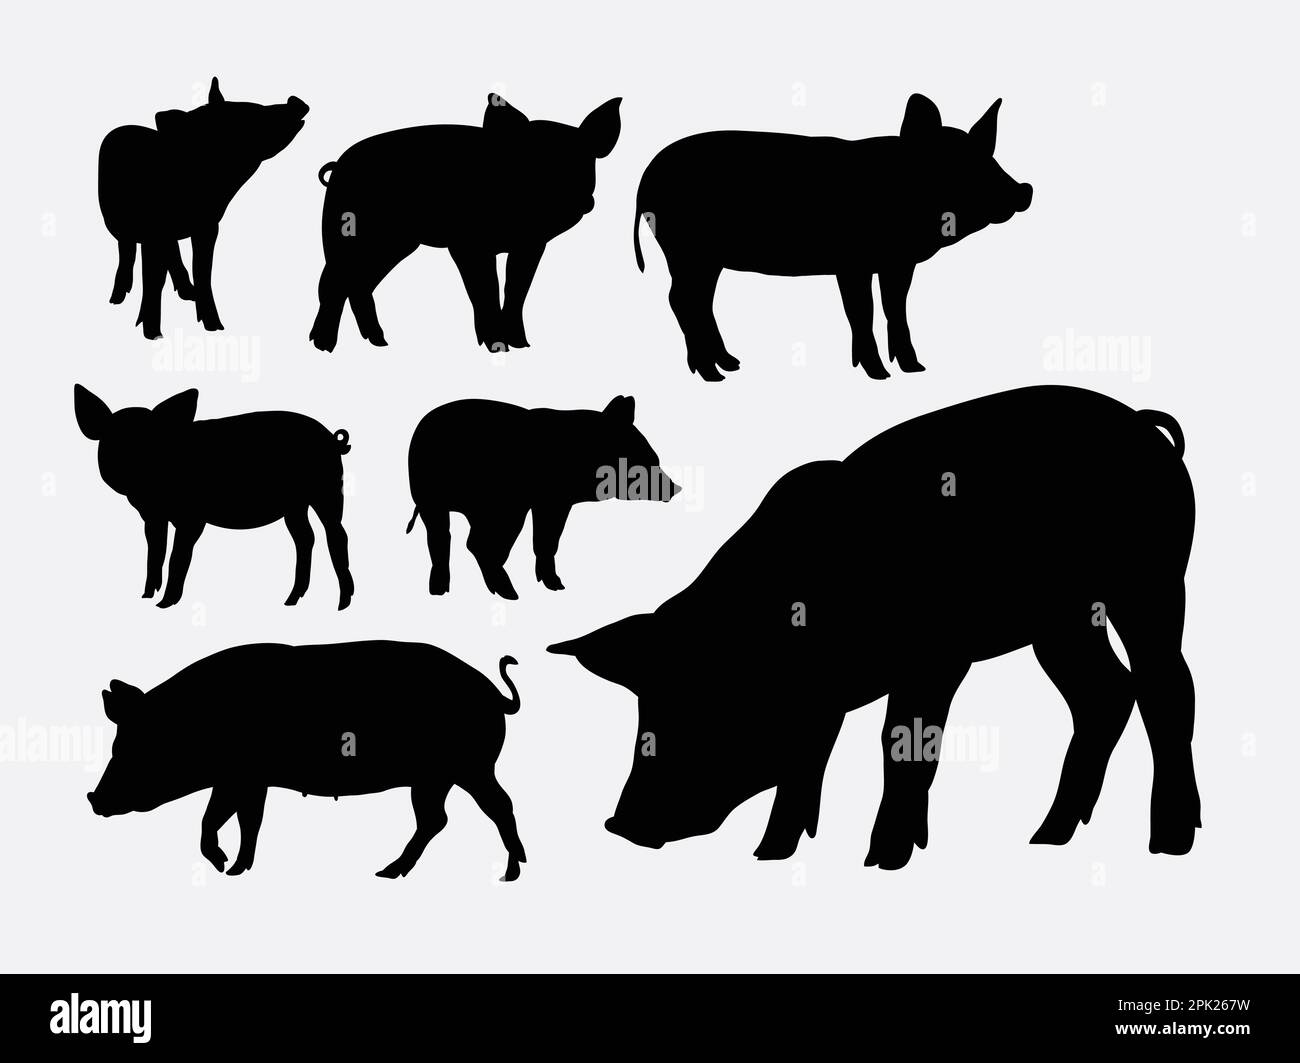 Pig animal silhouettes Stock Vector